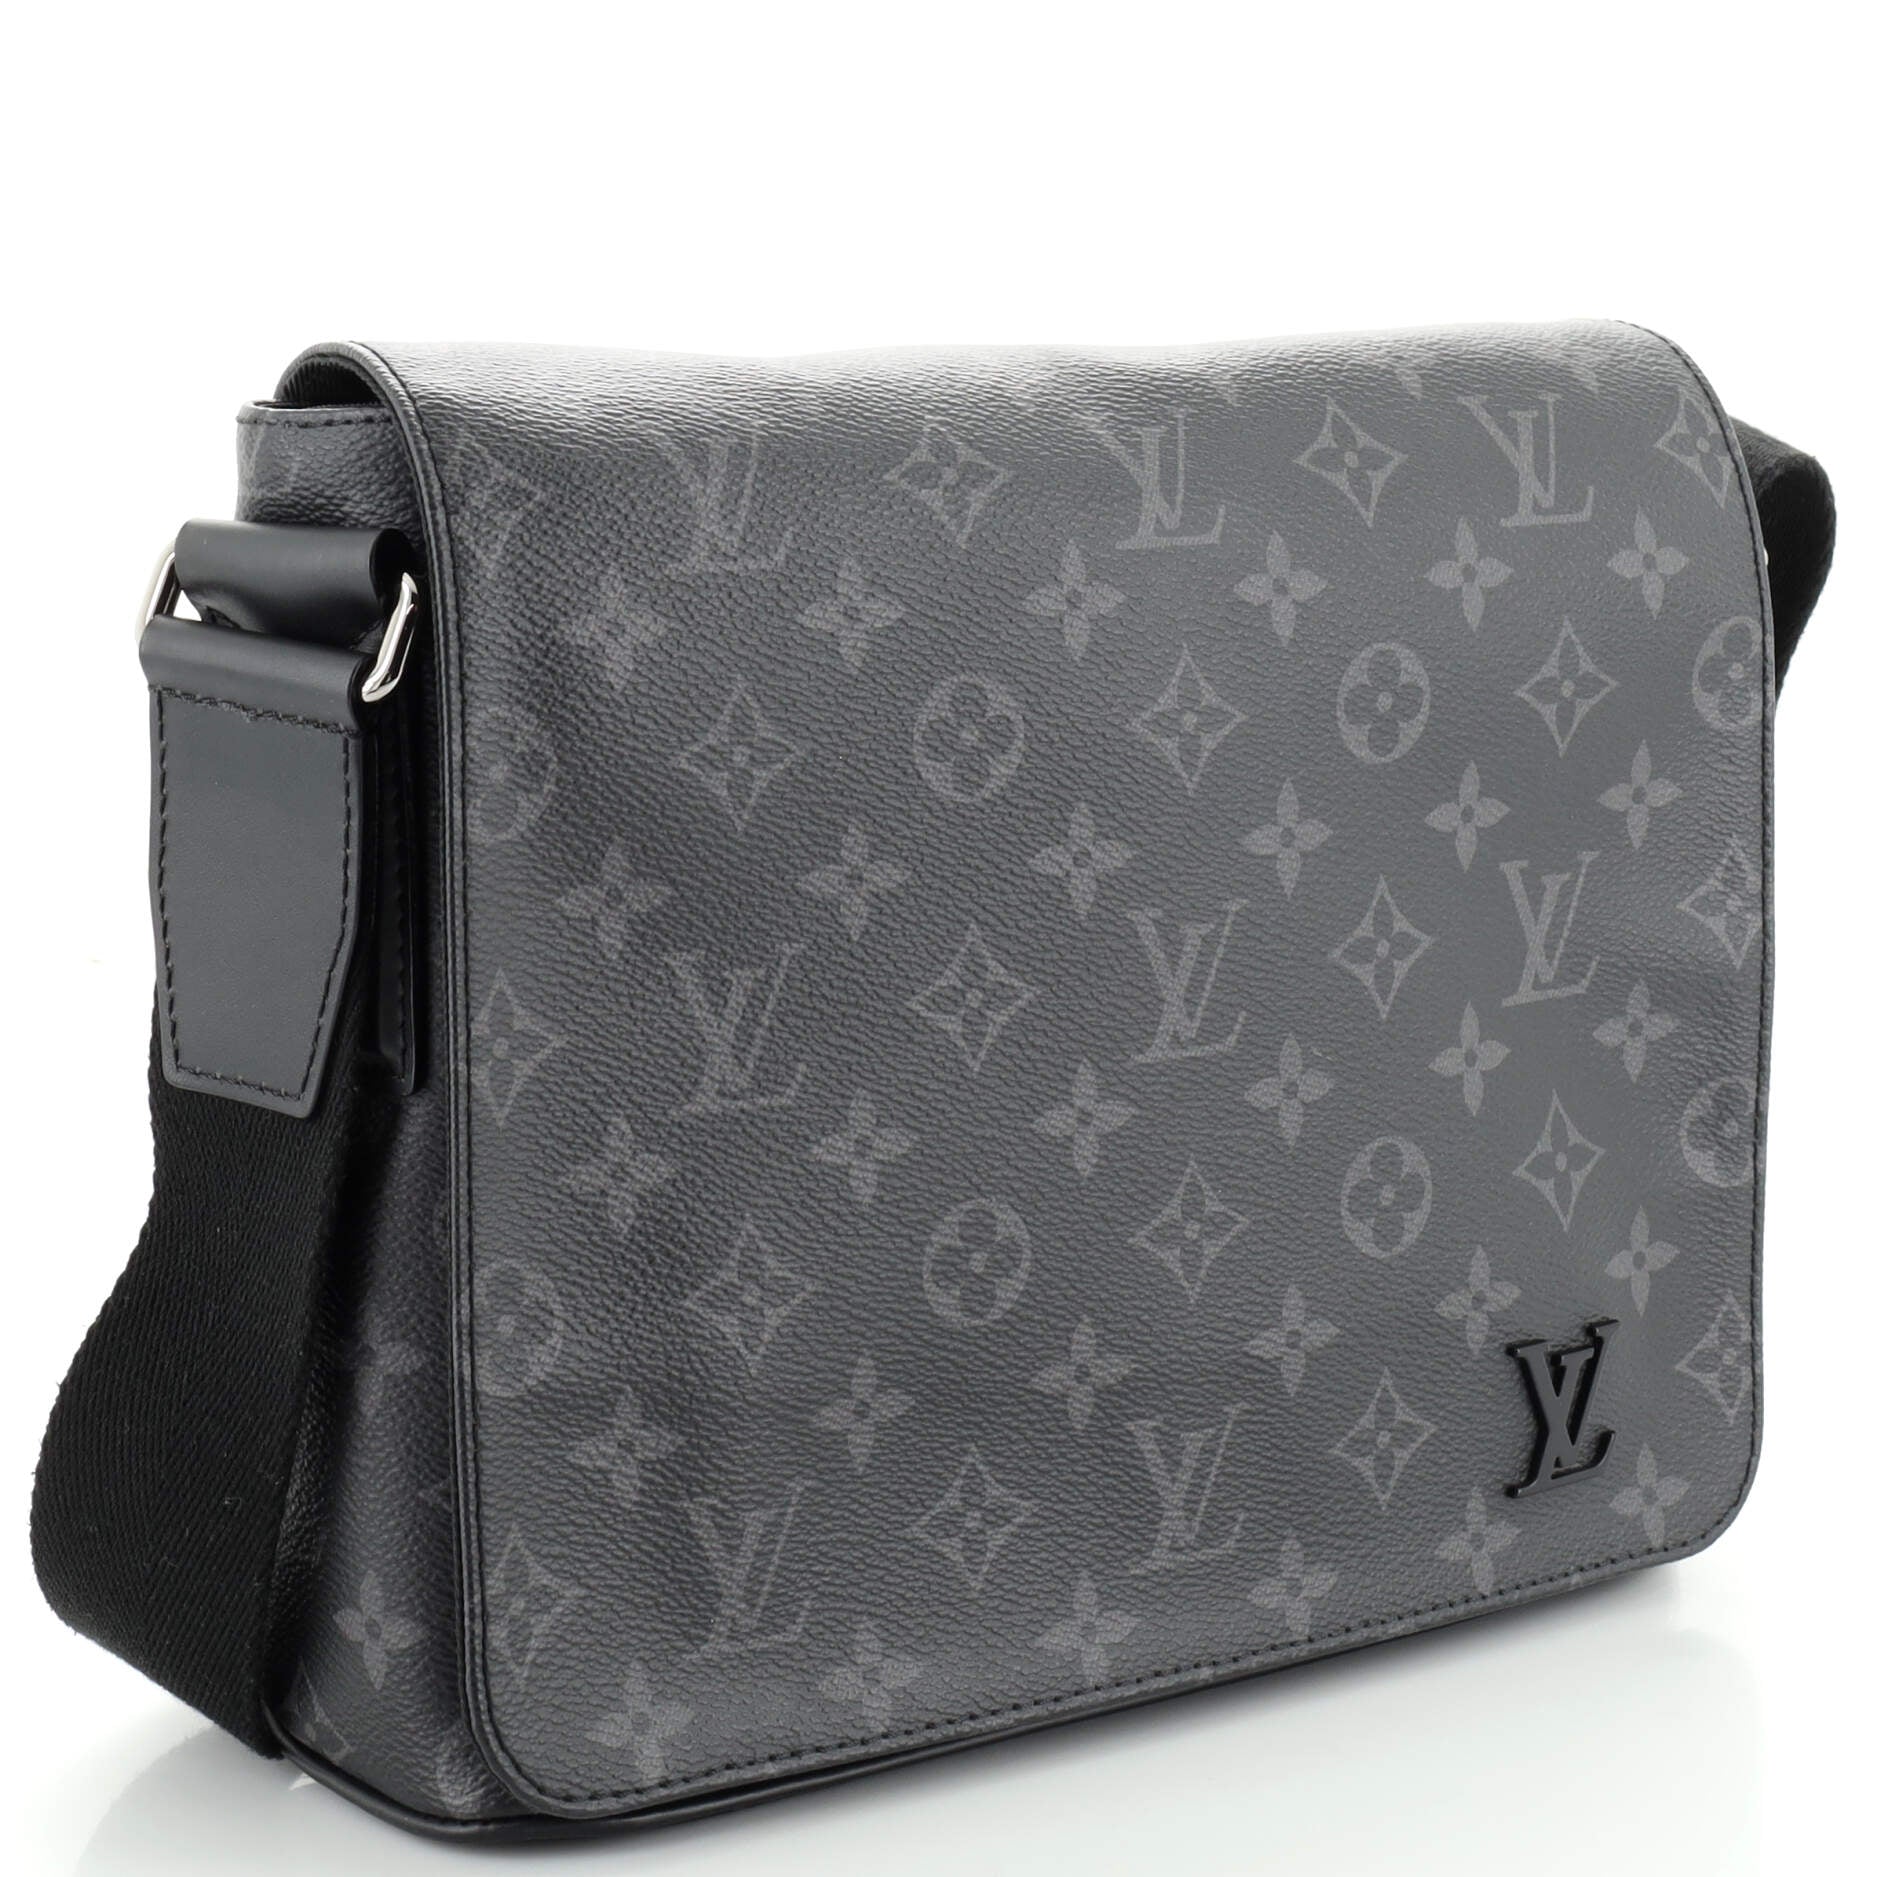 Louis Vuitton 2019 Pre-owned Discovery Messenger Bag - Black